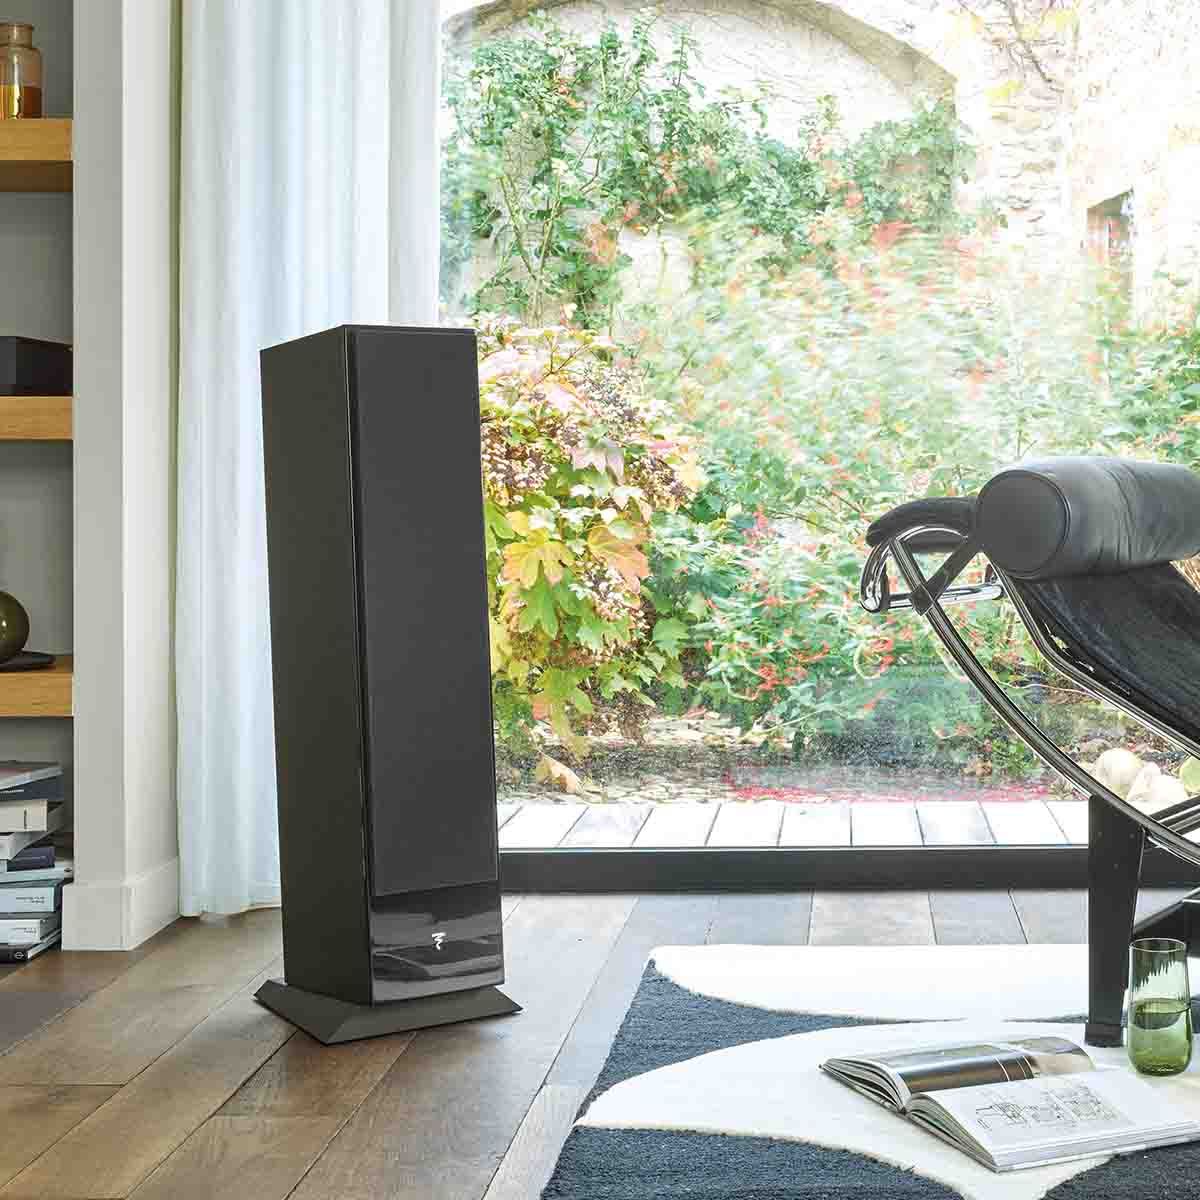 Focal Theva No2 Floorstanding Speaker - Each - in room next to window and chair